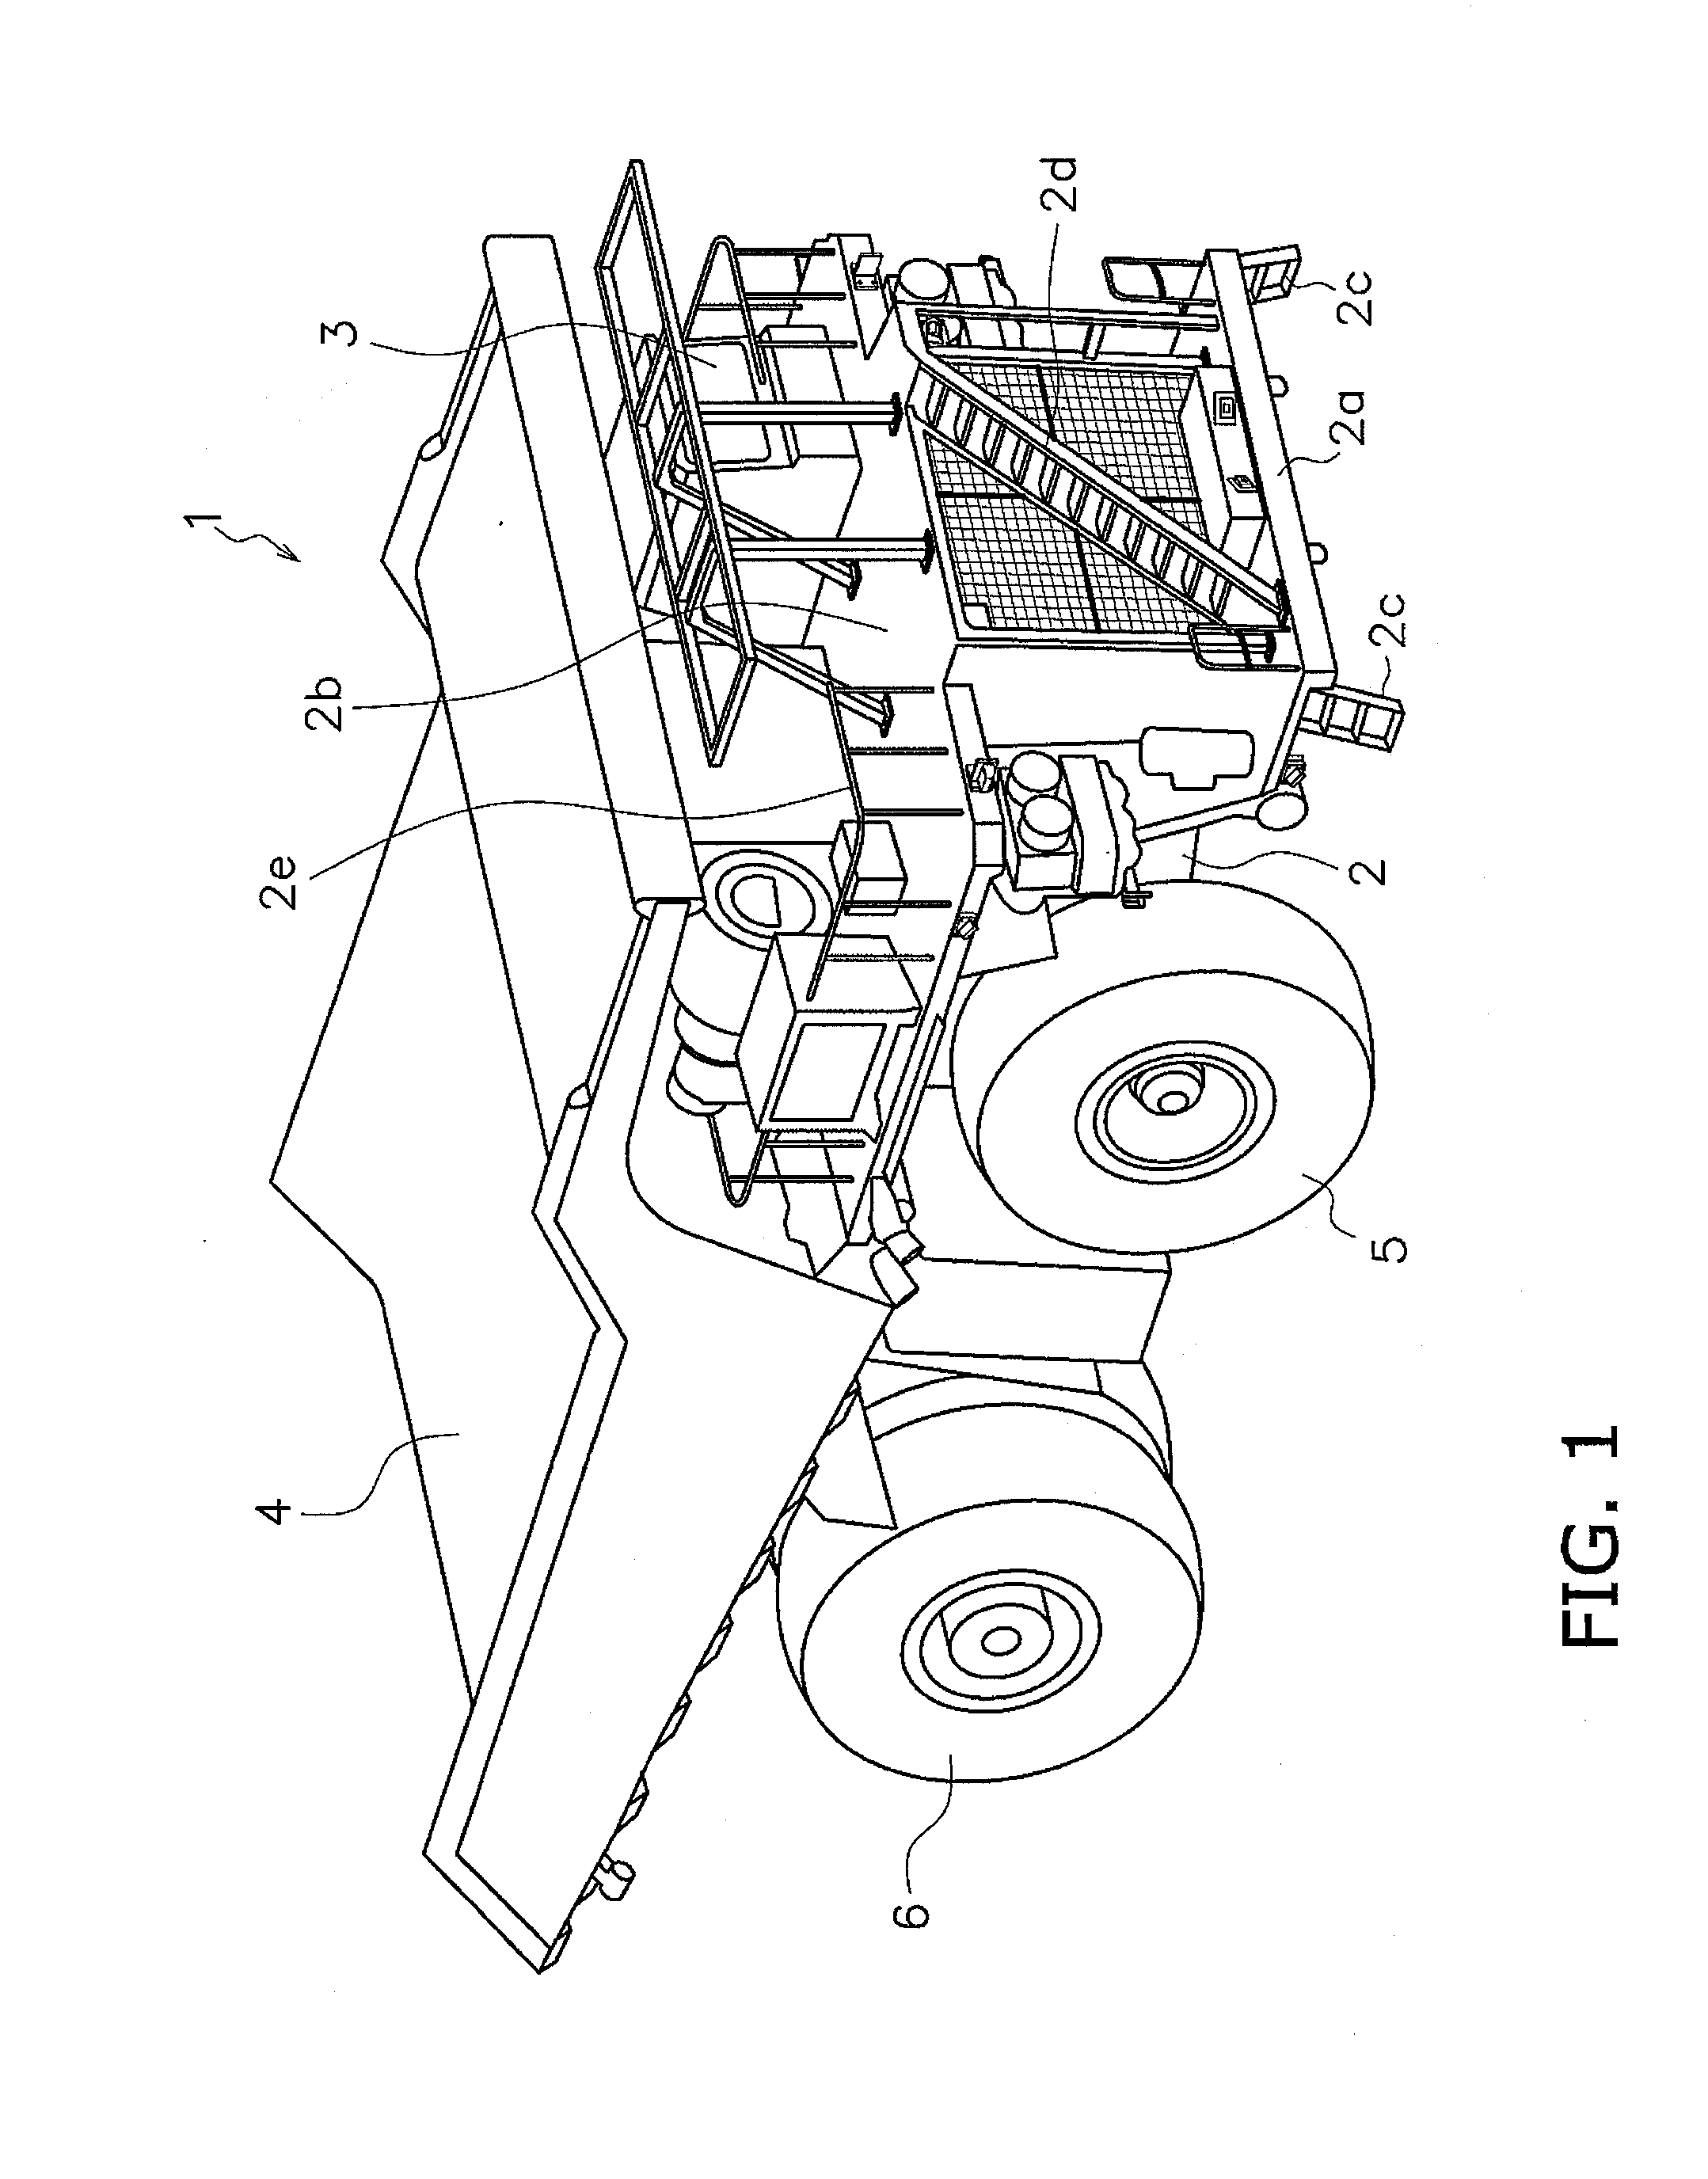 SURROUNDING AREA MONITORING DEVICE FOR WORK VEHICLE (as amended)